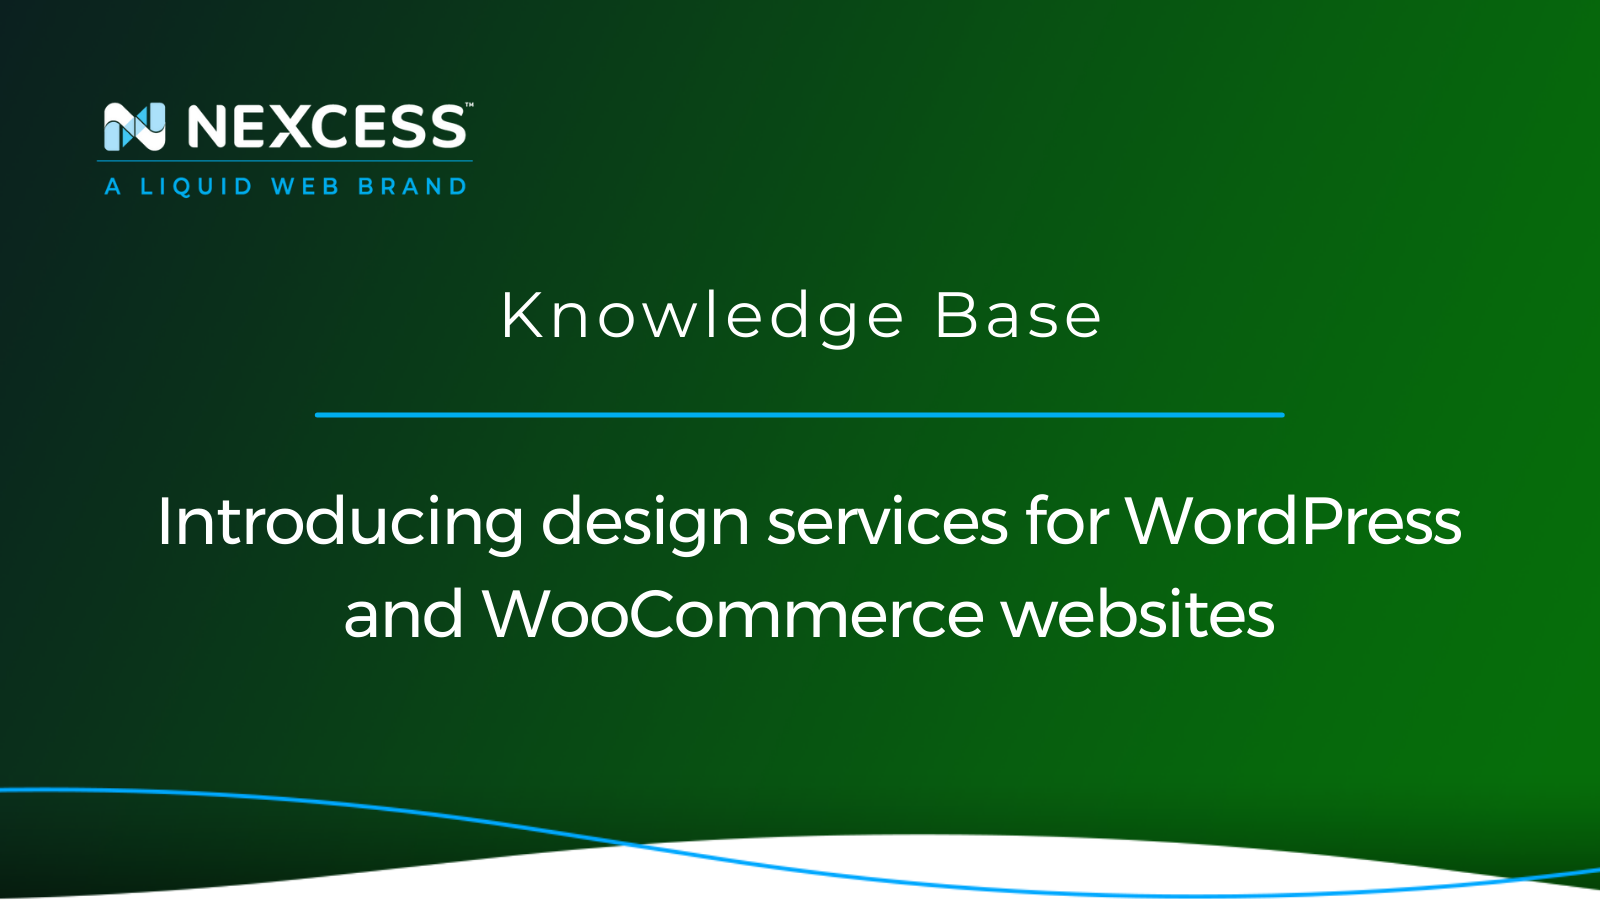 Introducing design services for WordPress and WooCommerce websites